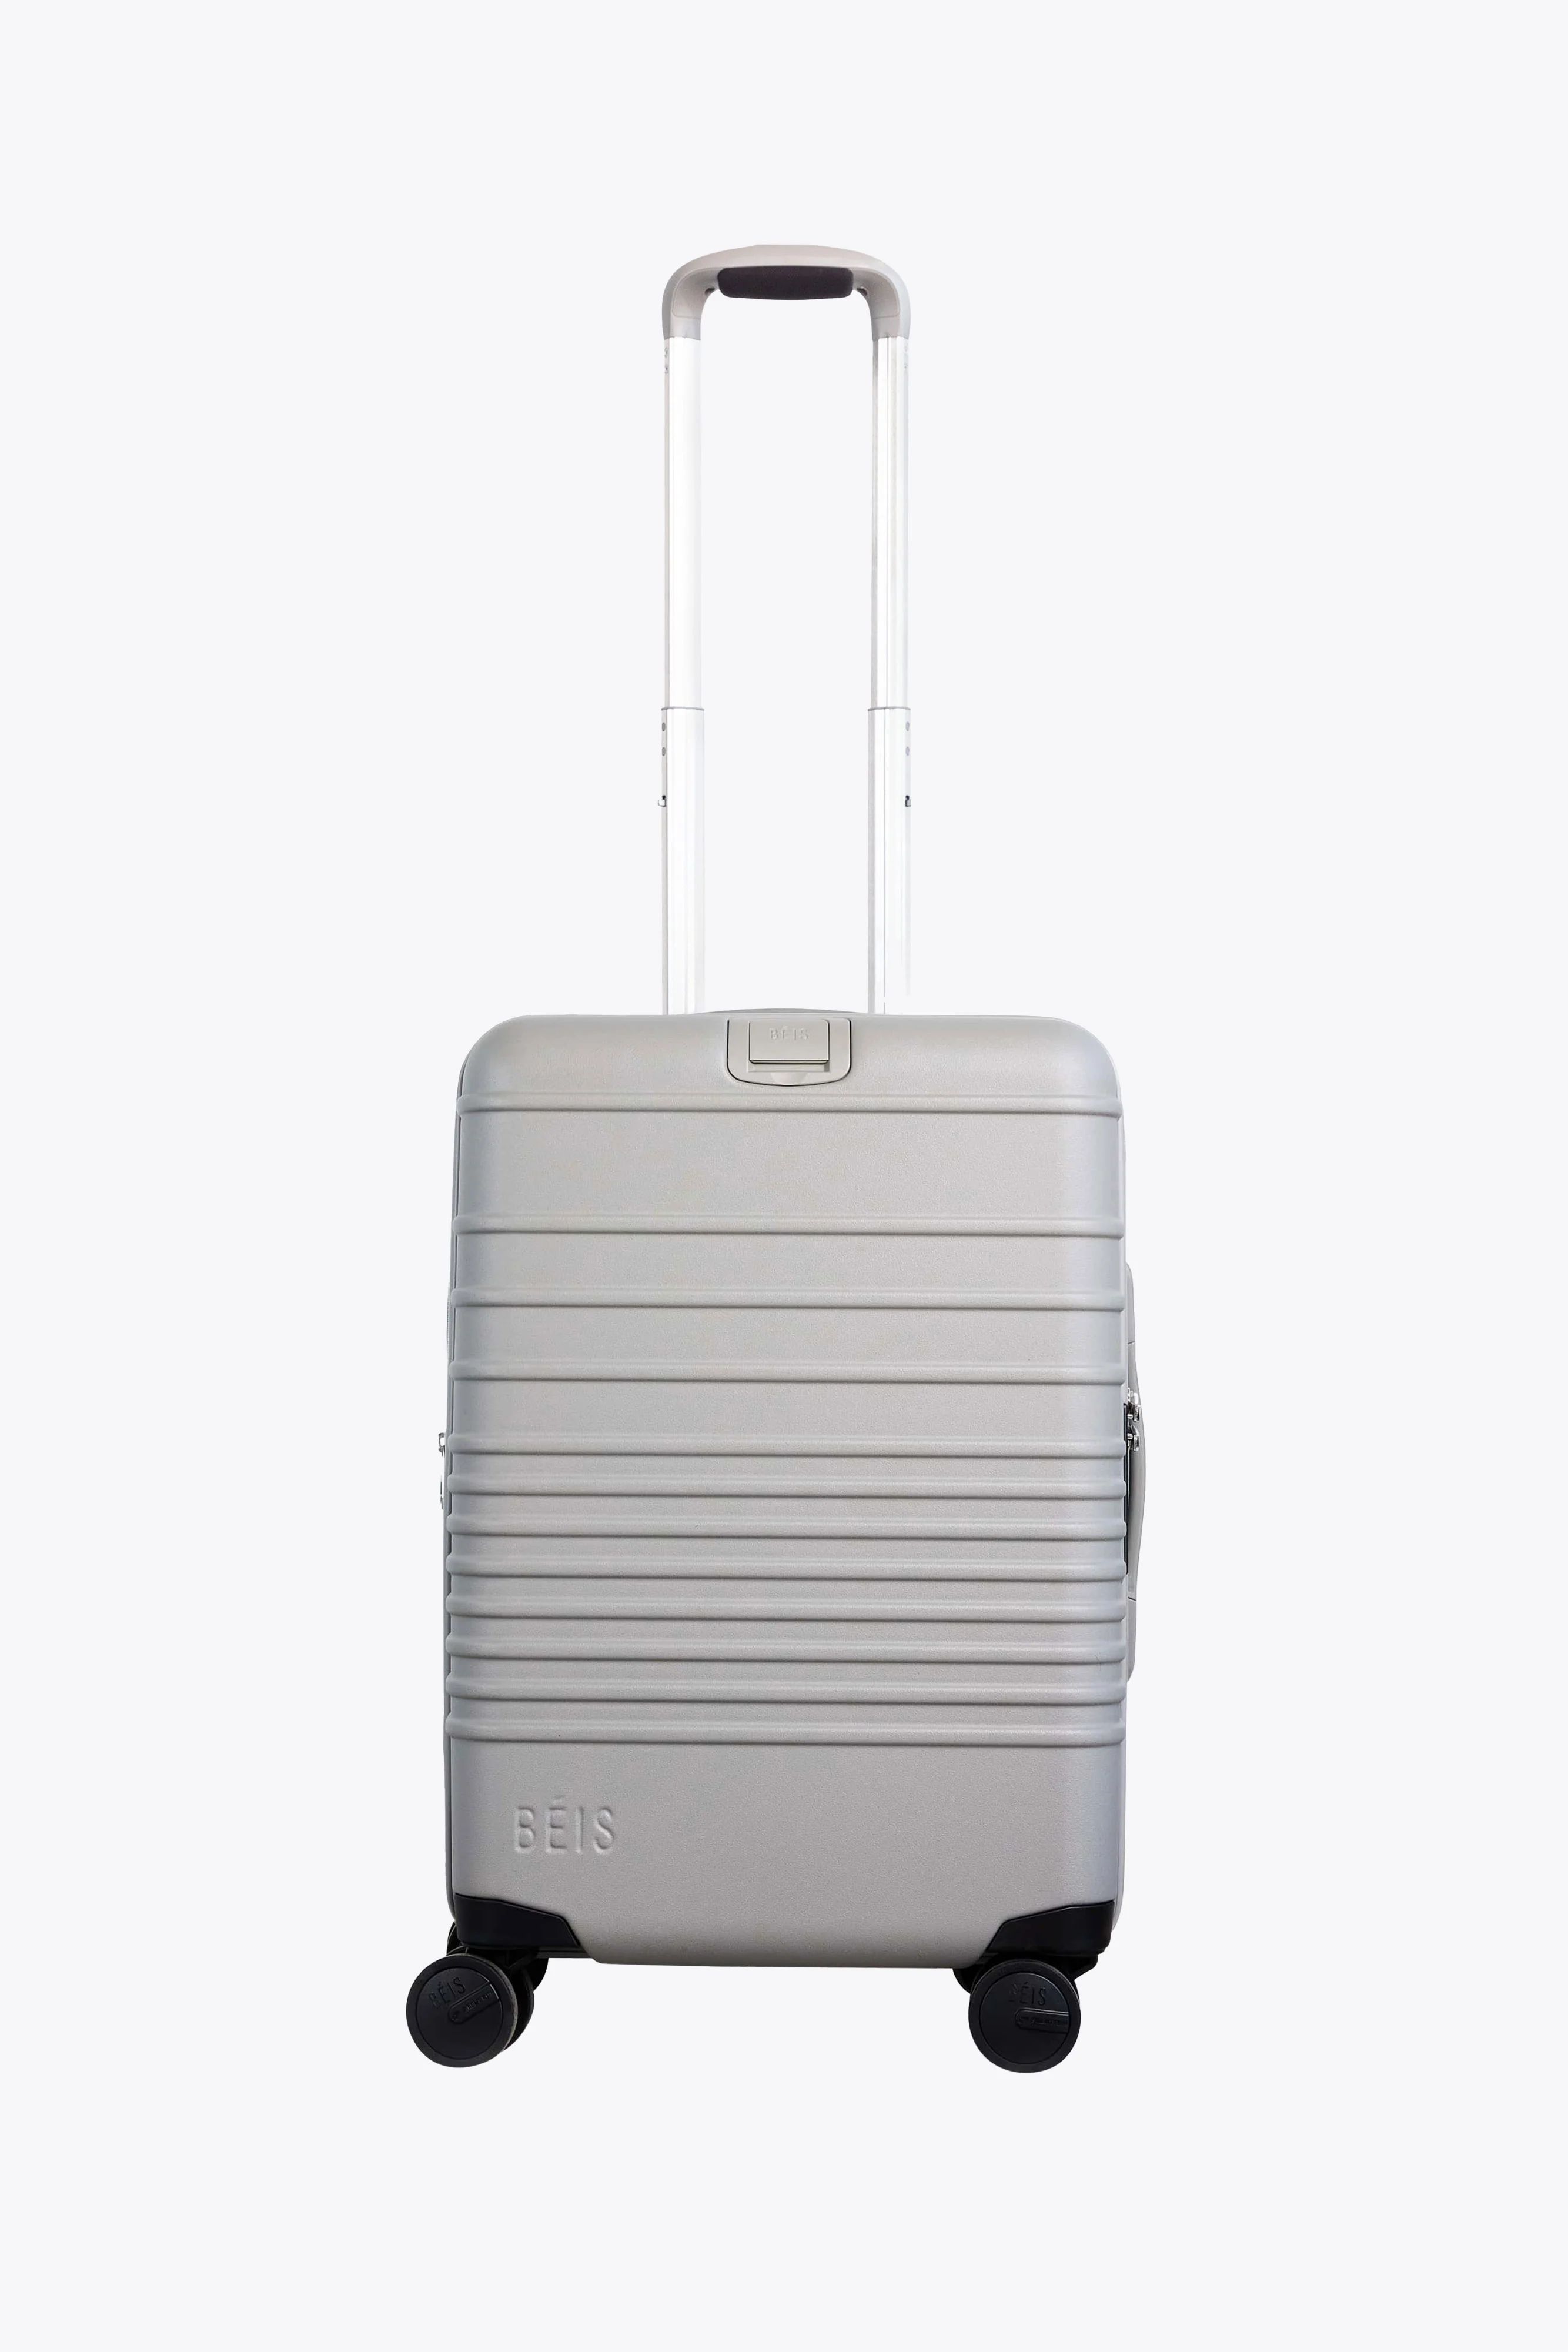 BÉIS 'The Carry-On Roller' in Grey - 21" Rolling Suitcase & Carry-On Luggage | BÉIS Travel